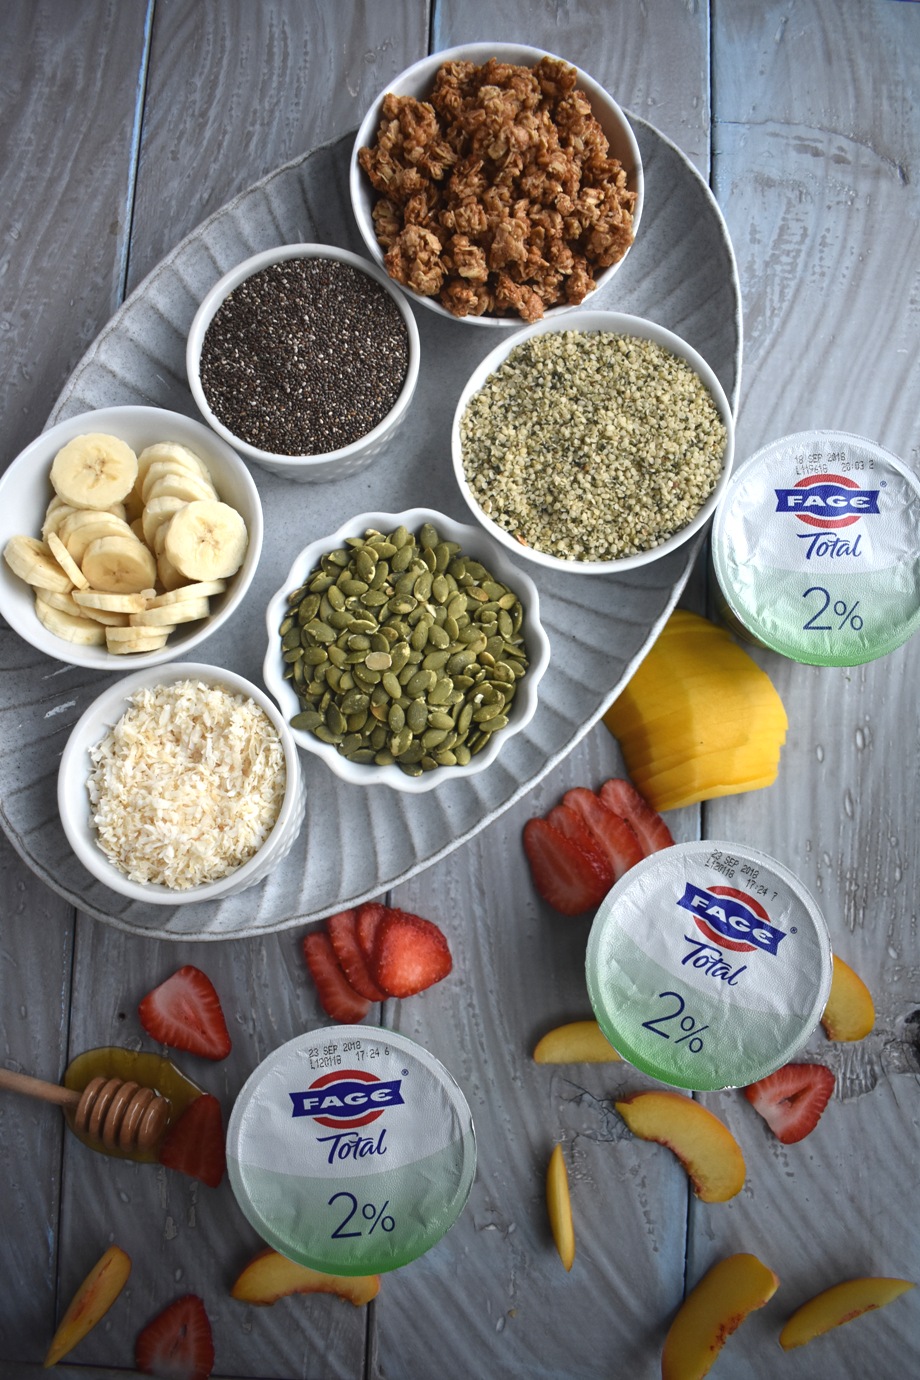 Build Your Own Yogurt Bowl Bar has tons of toppings for yogurt including fruit, honey, nuts, seeds, cereal, granola and more for a fun breakfast that the whole family will love and that is great for entertaining! www.nutritionistreviews.com